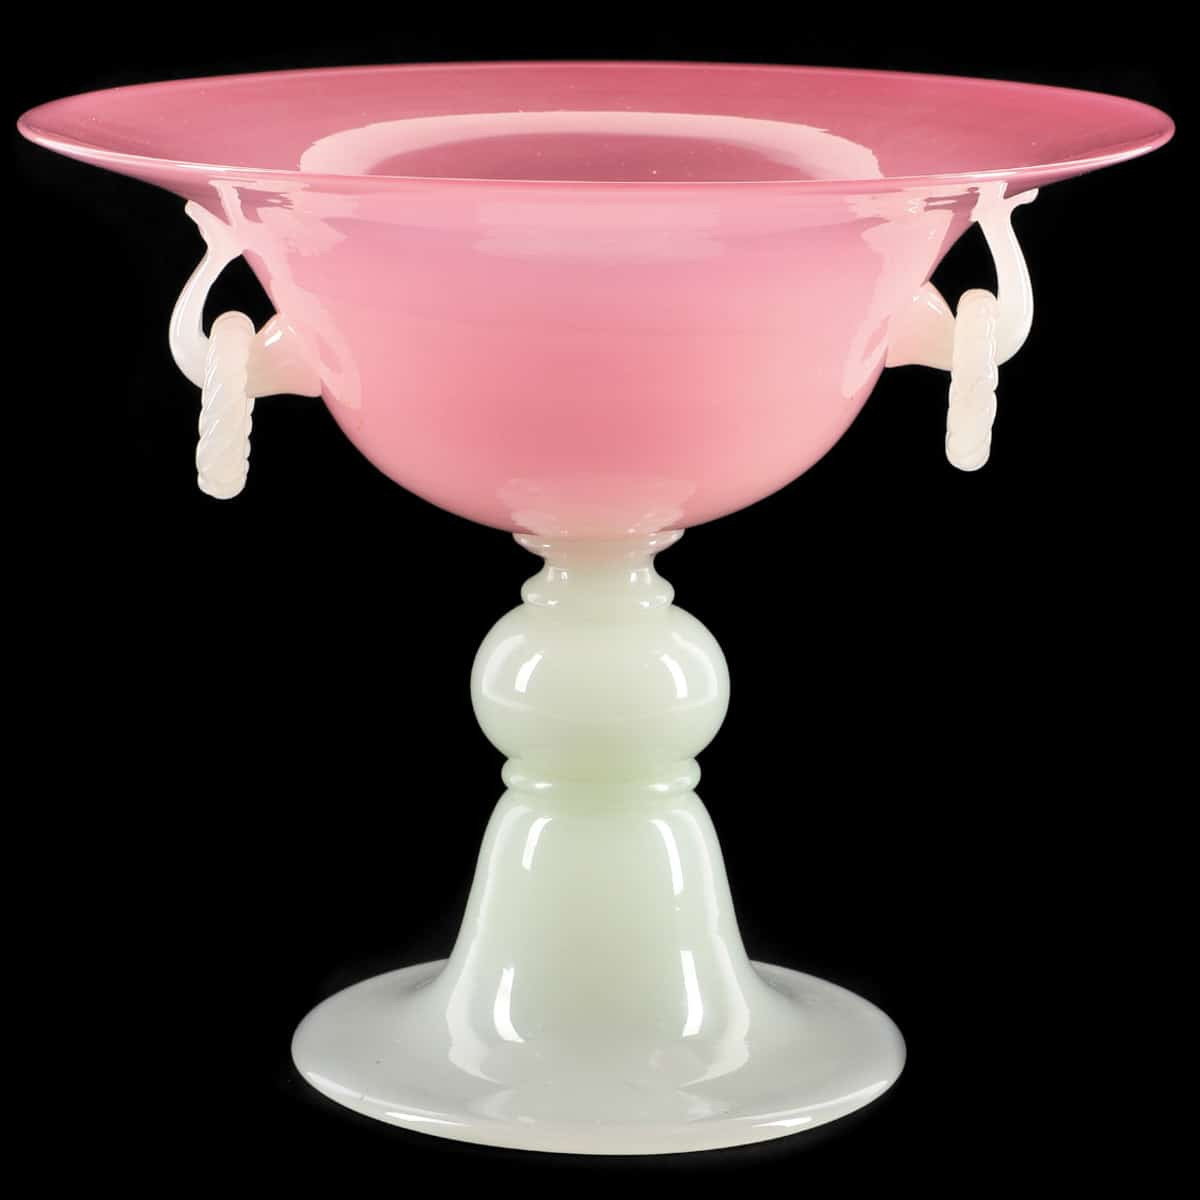 steuben glass vase of glass crystal intended for carder steuben rosaline and alabaster glass compote ahlers ogletree auction gallery